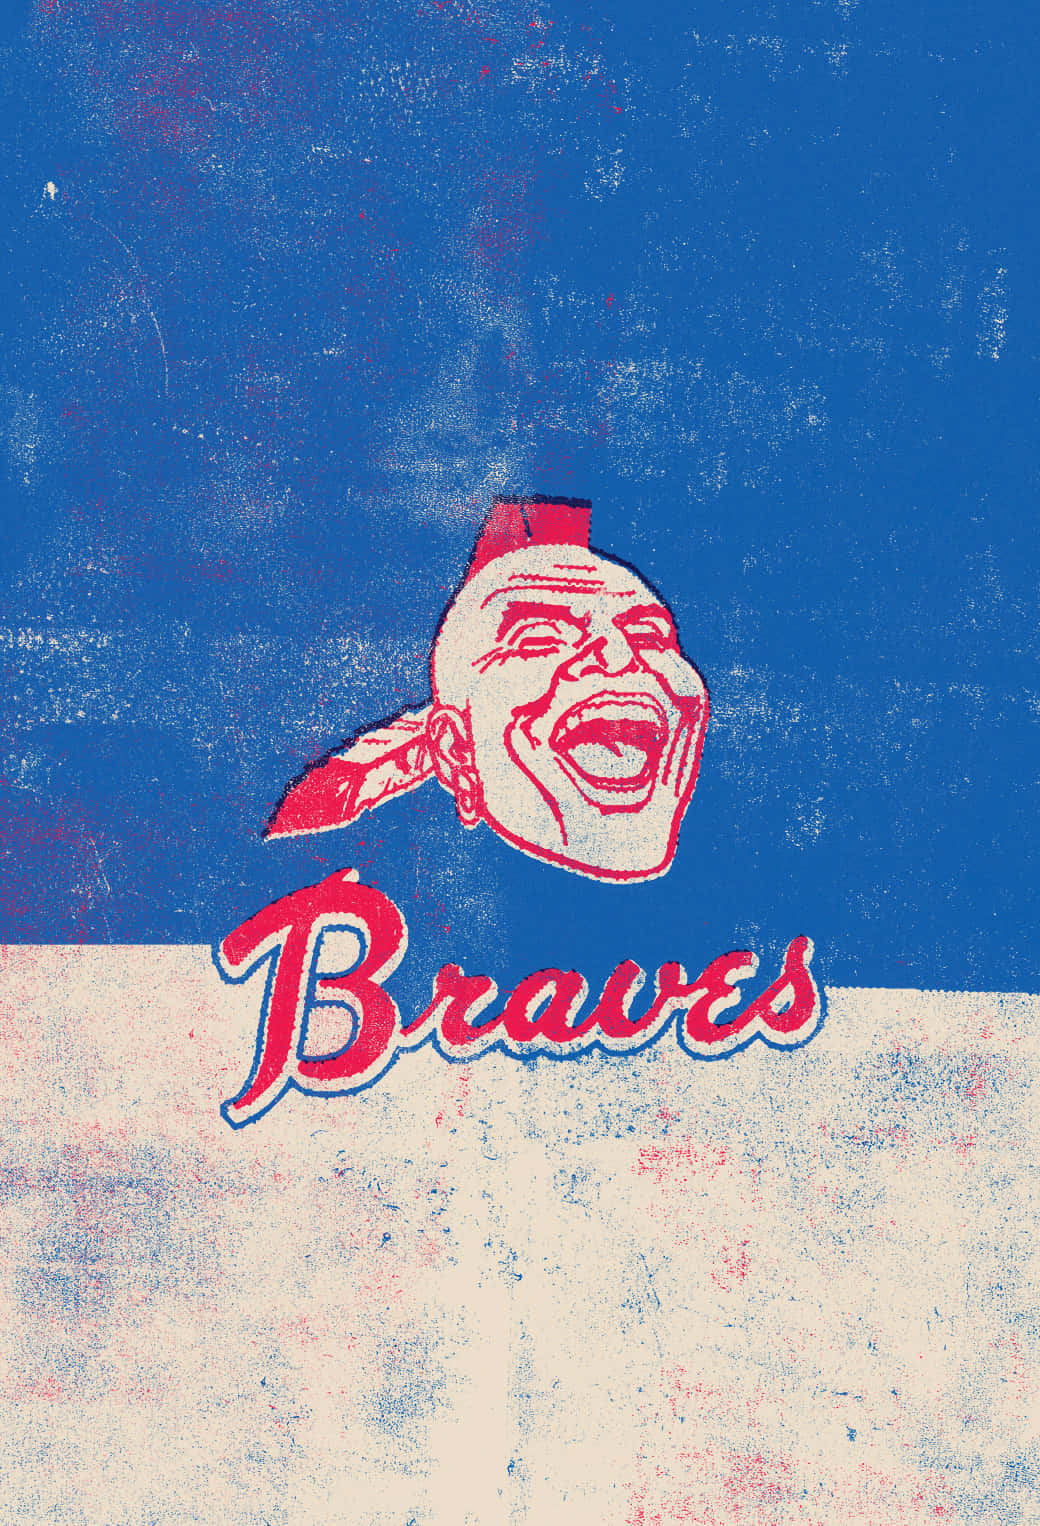 Show your love for the Atlanta Braves every day with this hip iPhone wallpaper. Wallpaper